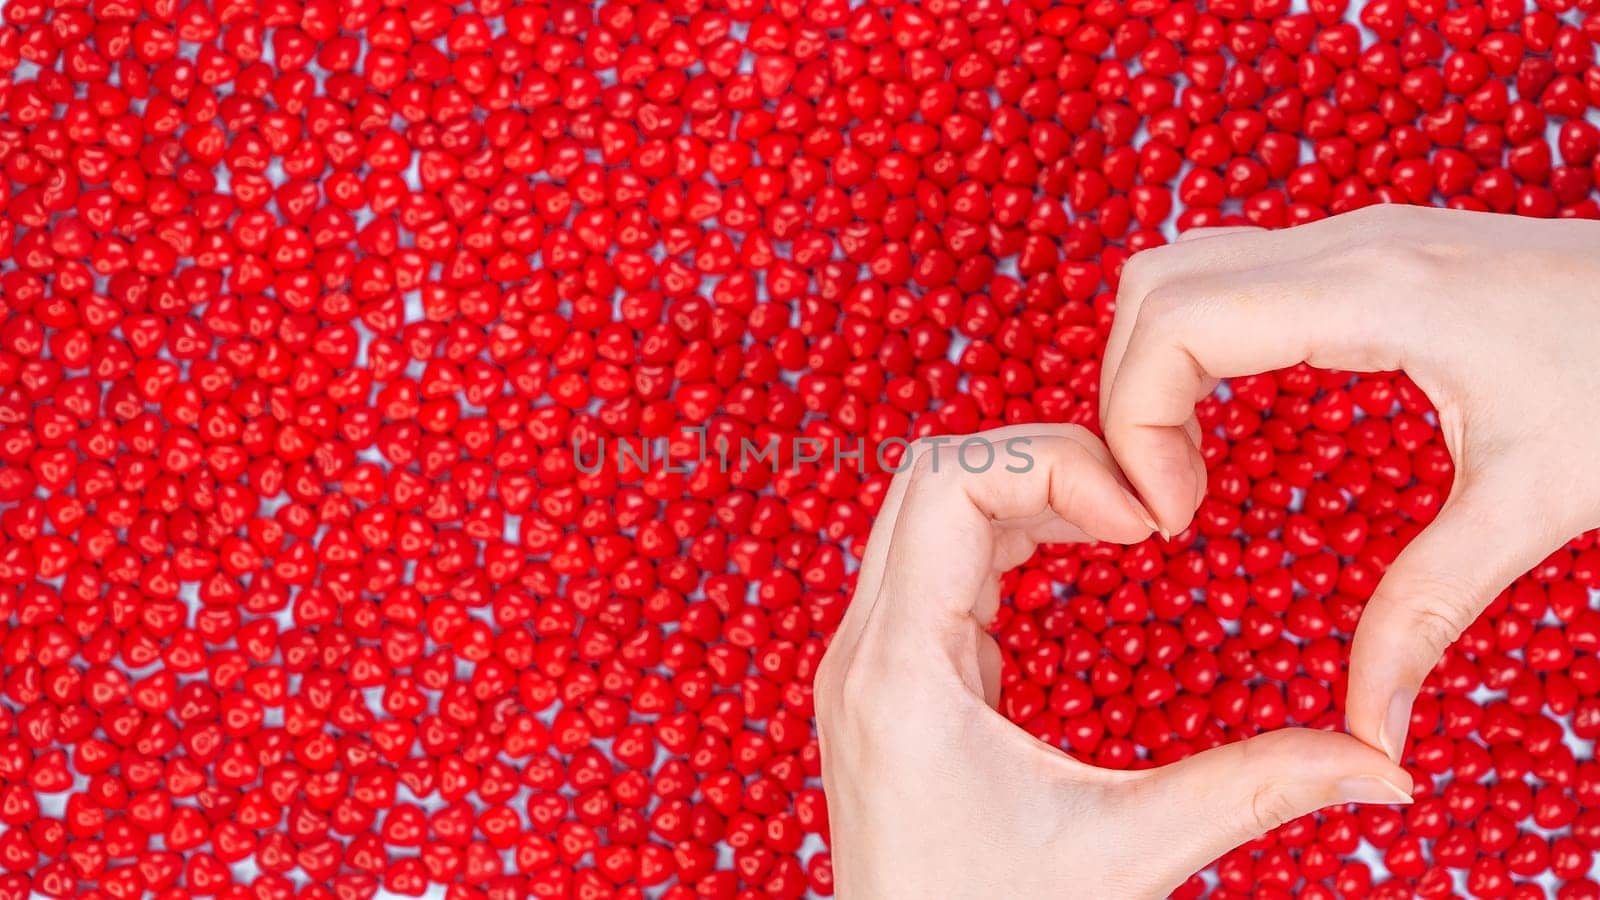 Woman hands making heart shape on red candy background. Heart from hands. Valentines Day concept. Symbol and shape of heart created from hands. Red peppermint candy. The concept of unity and charity. by JuliaDorian